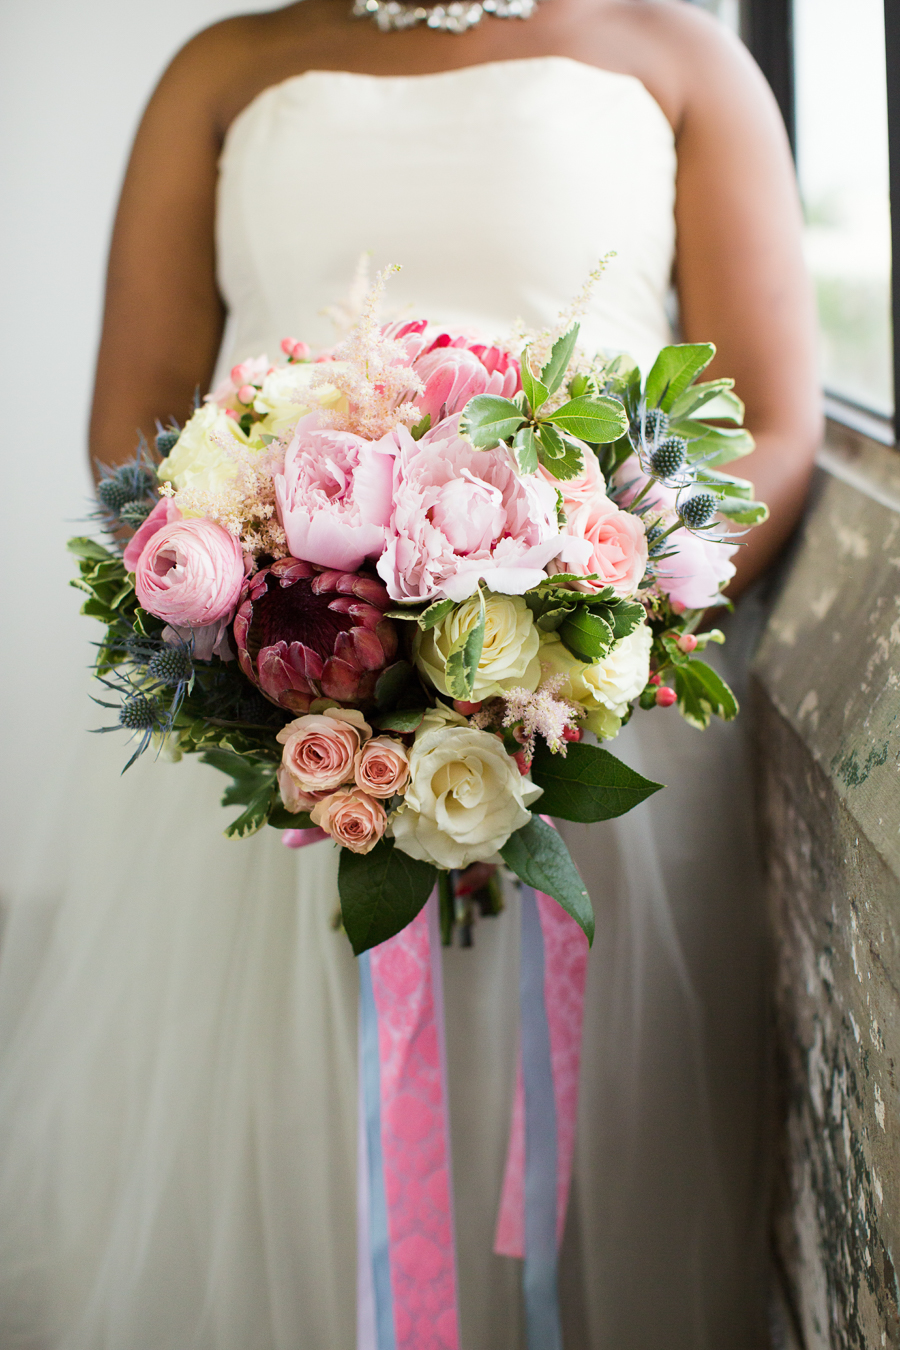 Houston Tuesdays Together (Rising Tide Society) Pantone Colors Styled Shoot, African American Bride, Bright and colorful wedding bouquet with ribbon